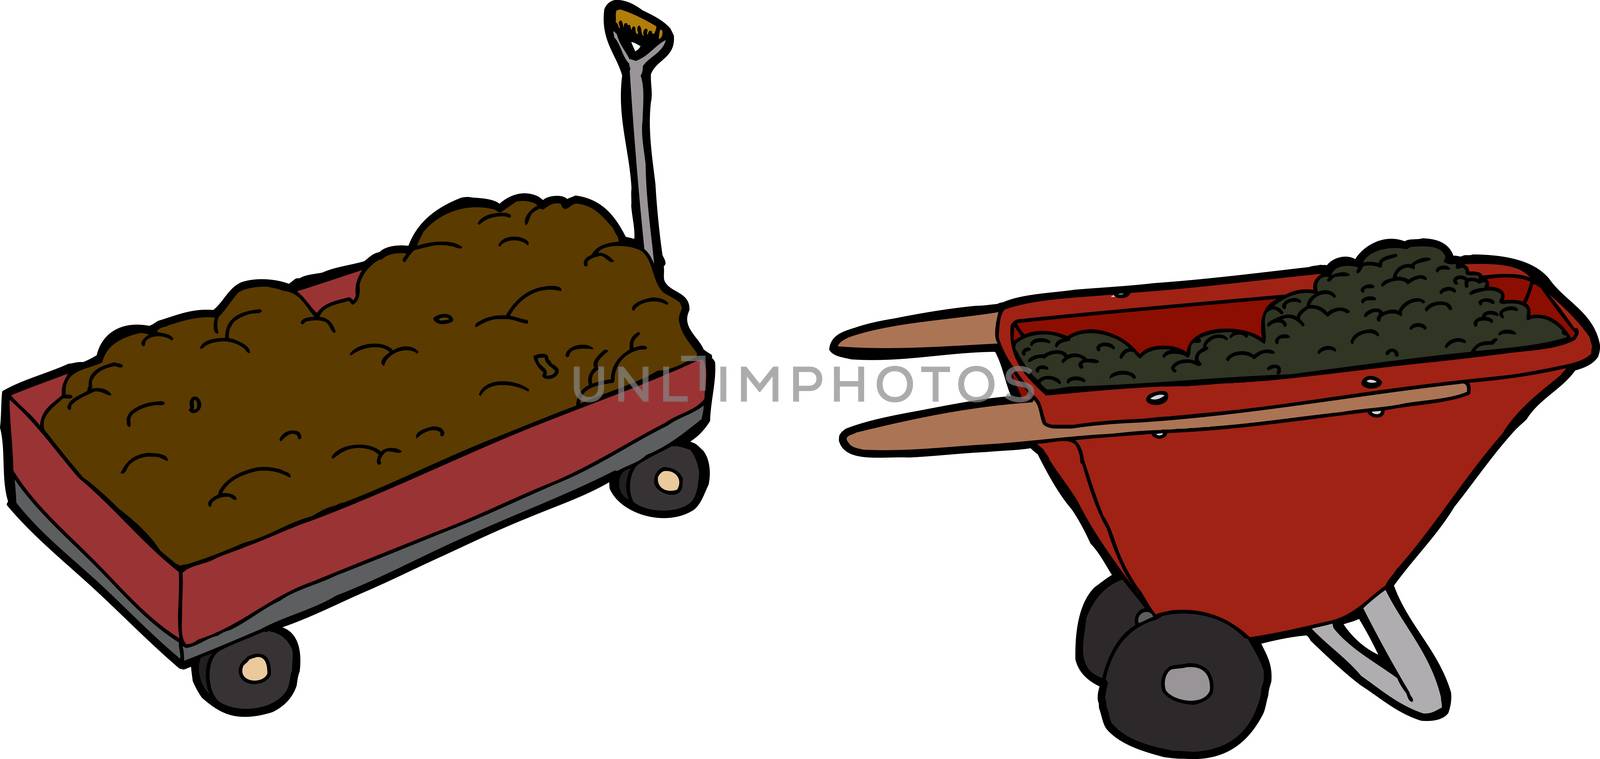 Full illustrated wheel barrows on white background